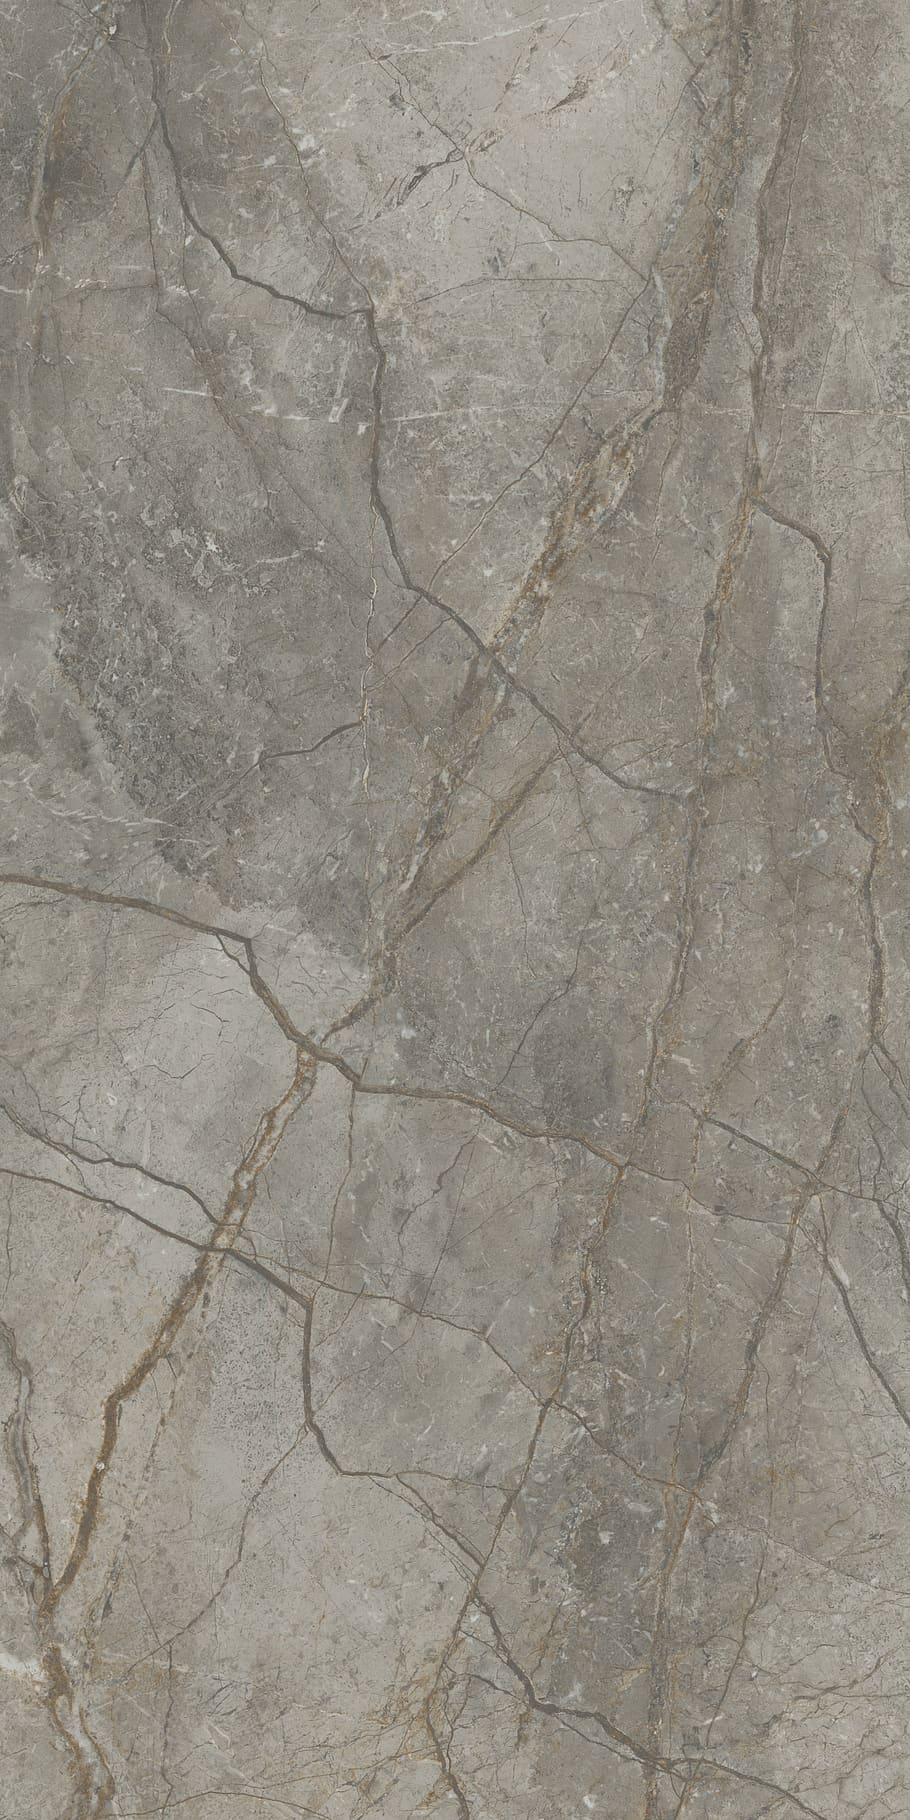 marble, background, context, background marble, the surface, gray, rock, structure, floor, tiles